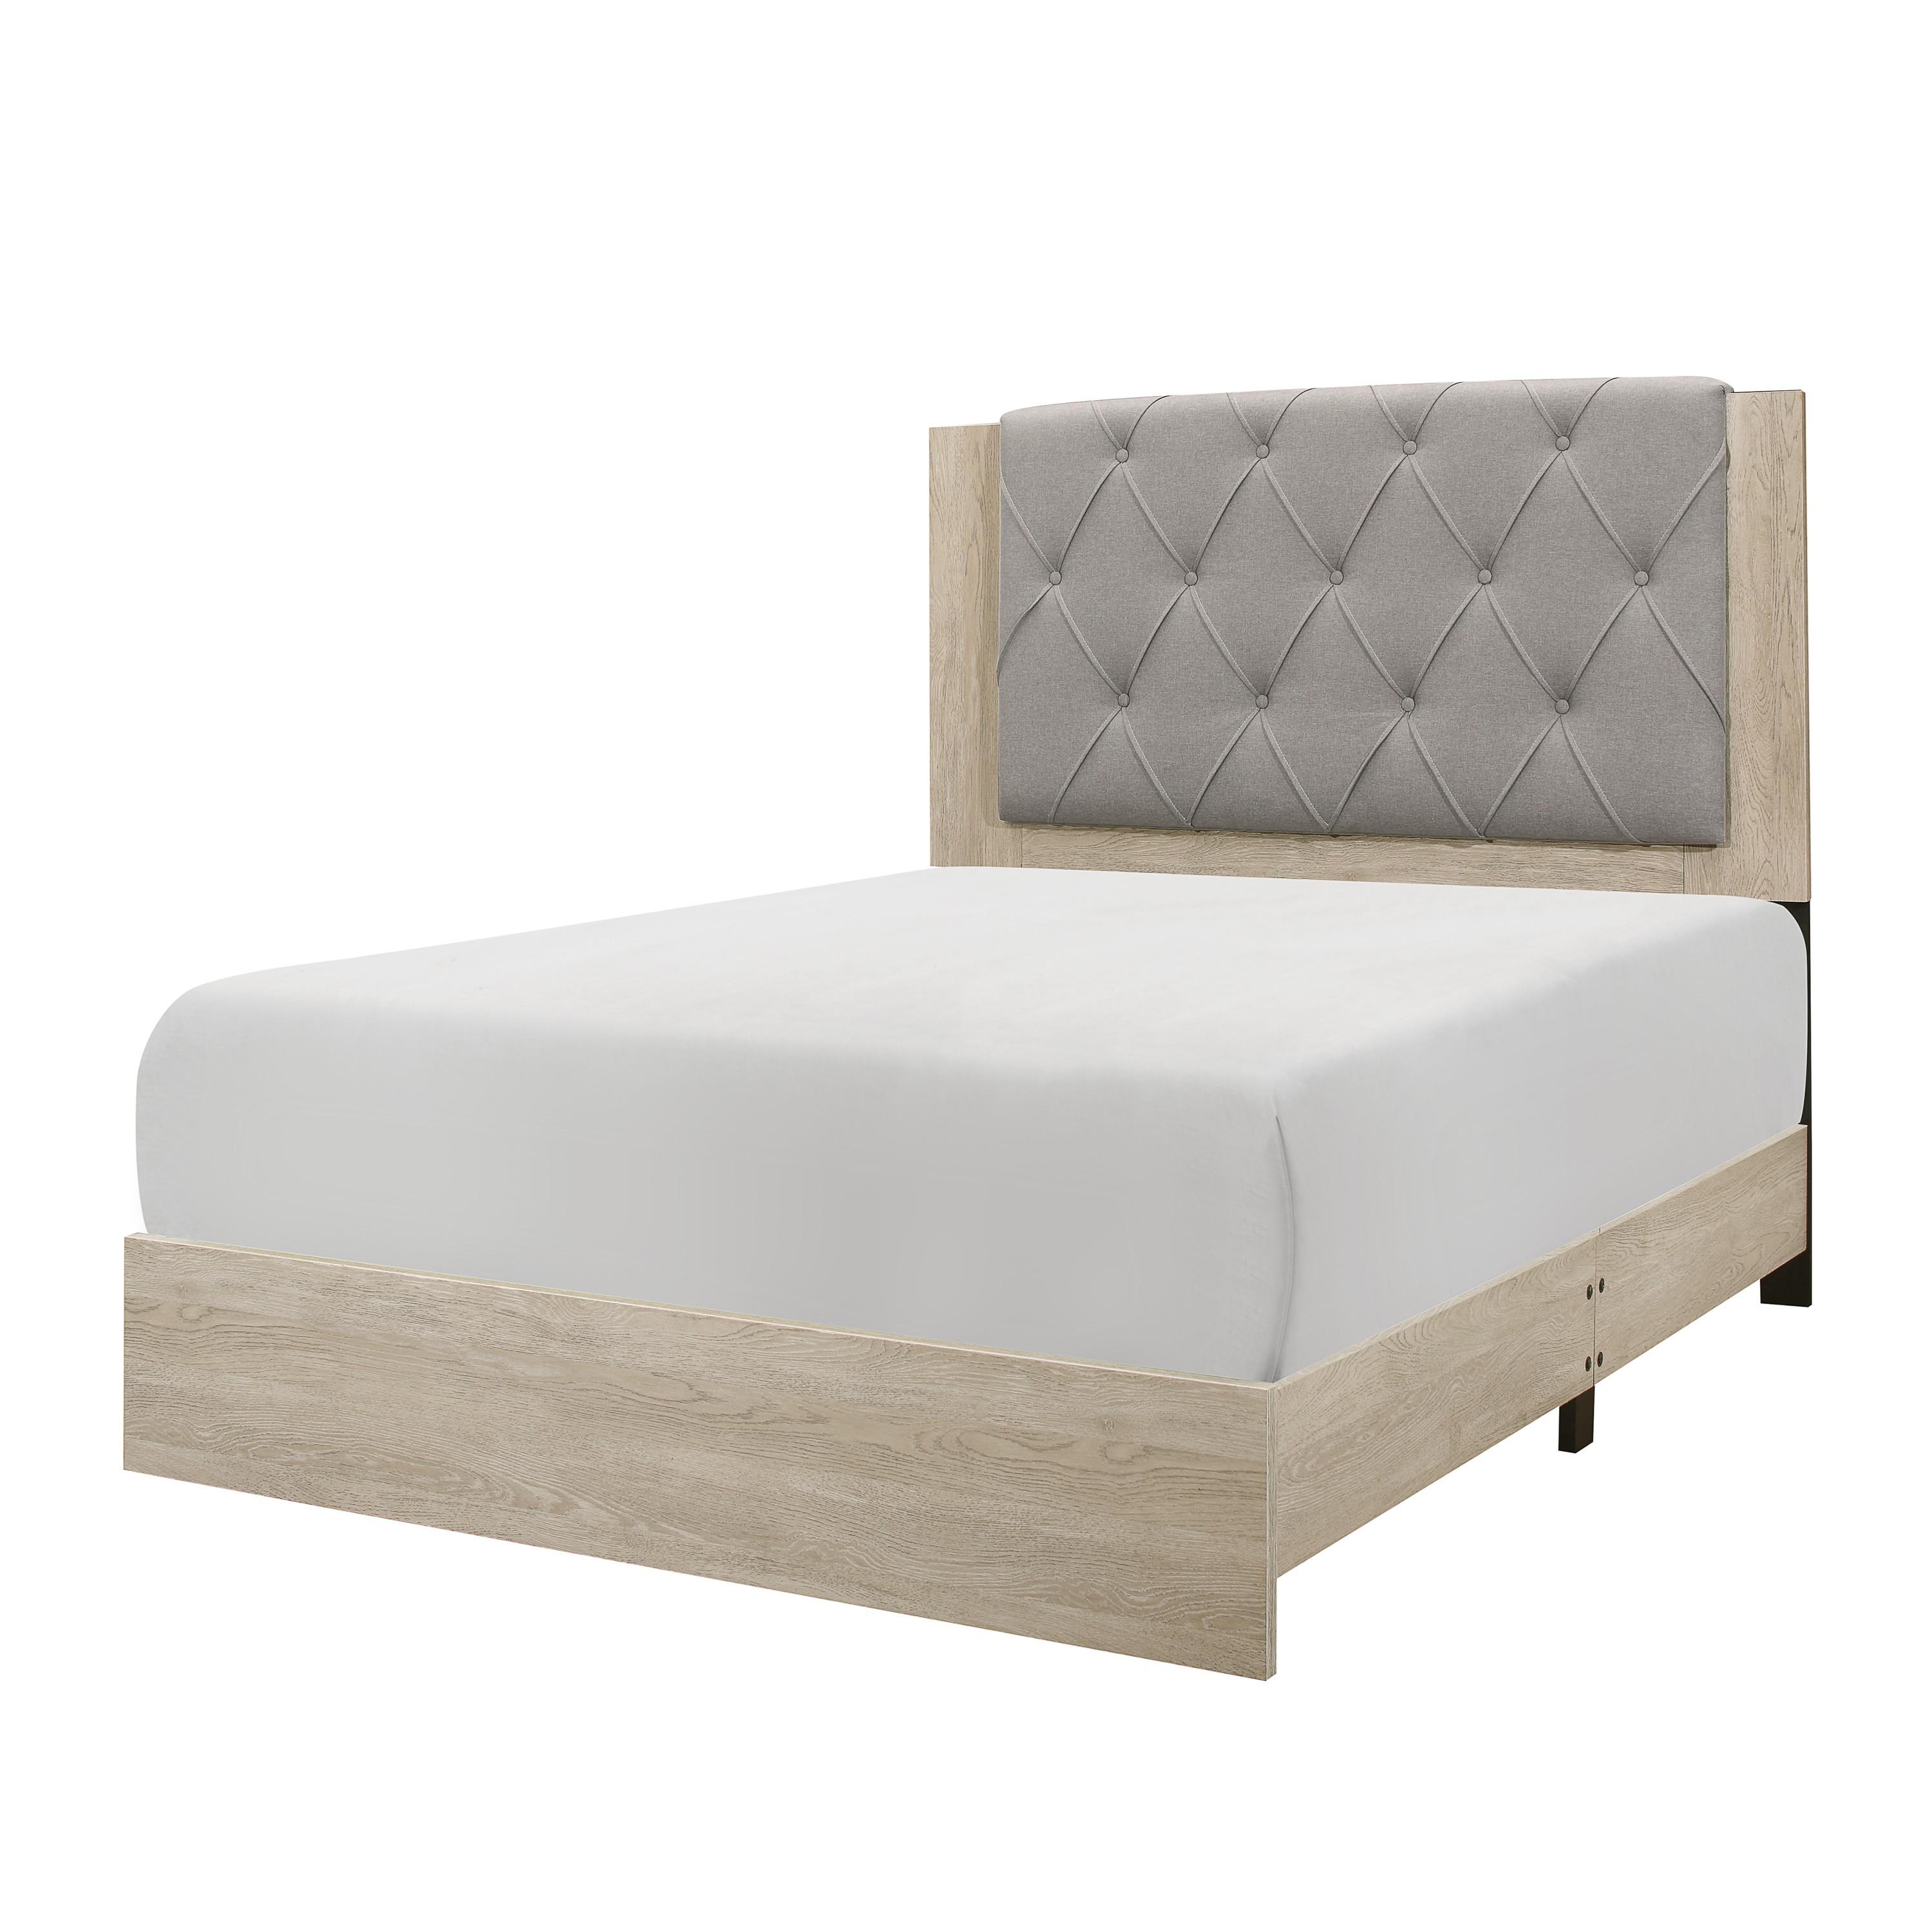 Modern Bed 1524-1 Whiting 1524-1 in Cream Polyester